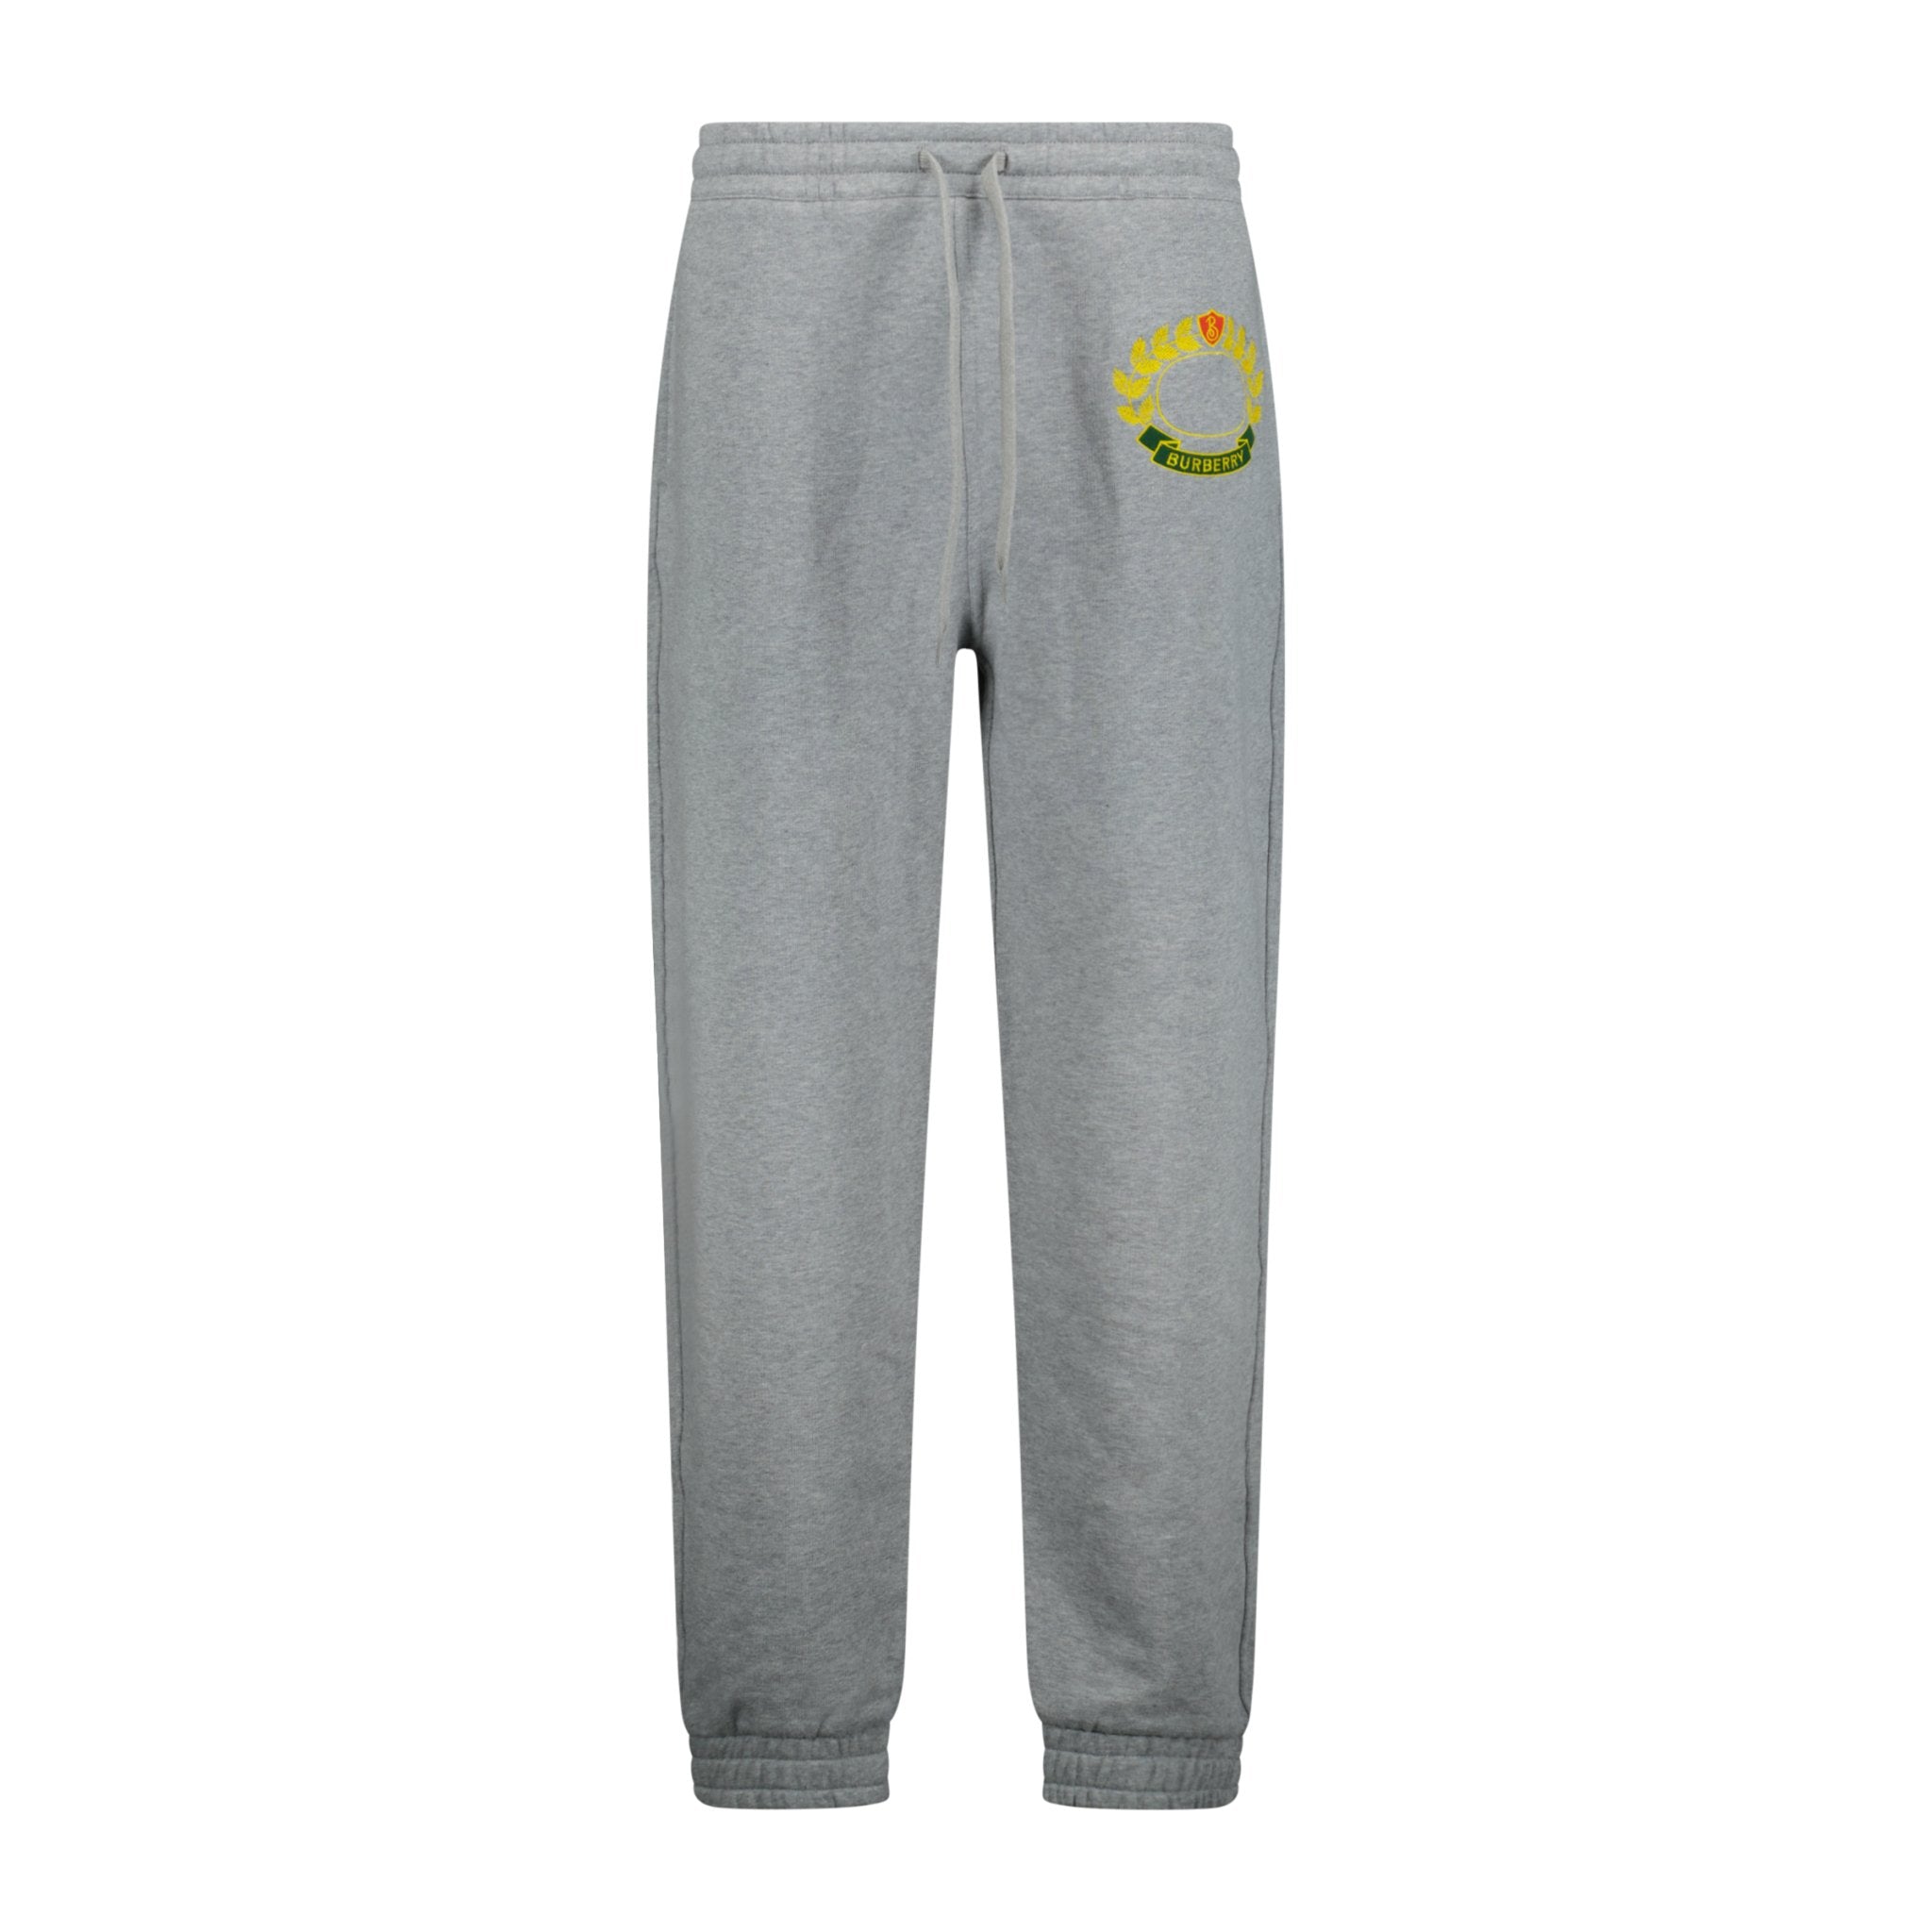 Burberry 'Oxted' Logo Cuffed Sweat Pants Grey